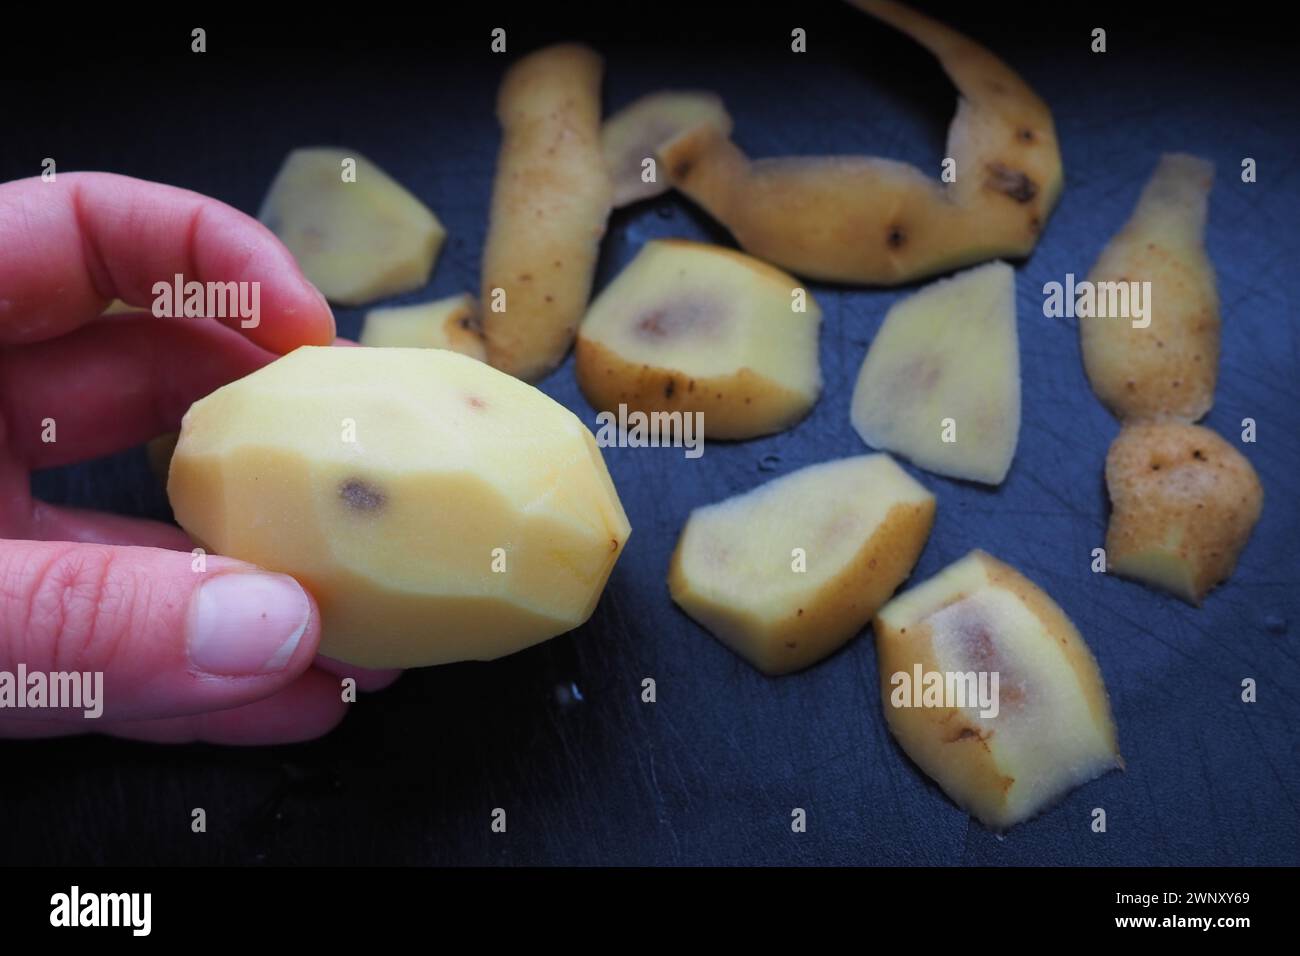 Fungal, viral or bacterial infection of the potato tuber. Dark spots inside the potato. Peeled raw potato with spots and a hole in a woman's hand Stock Photo